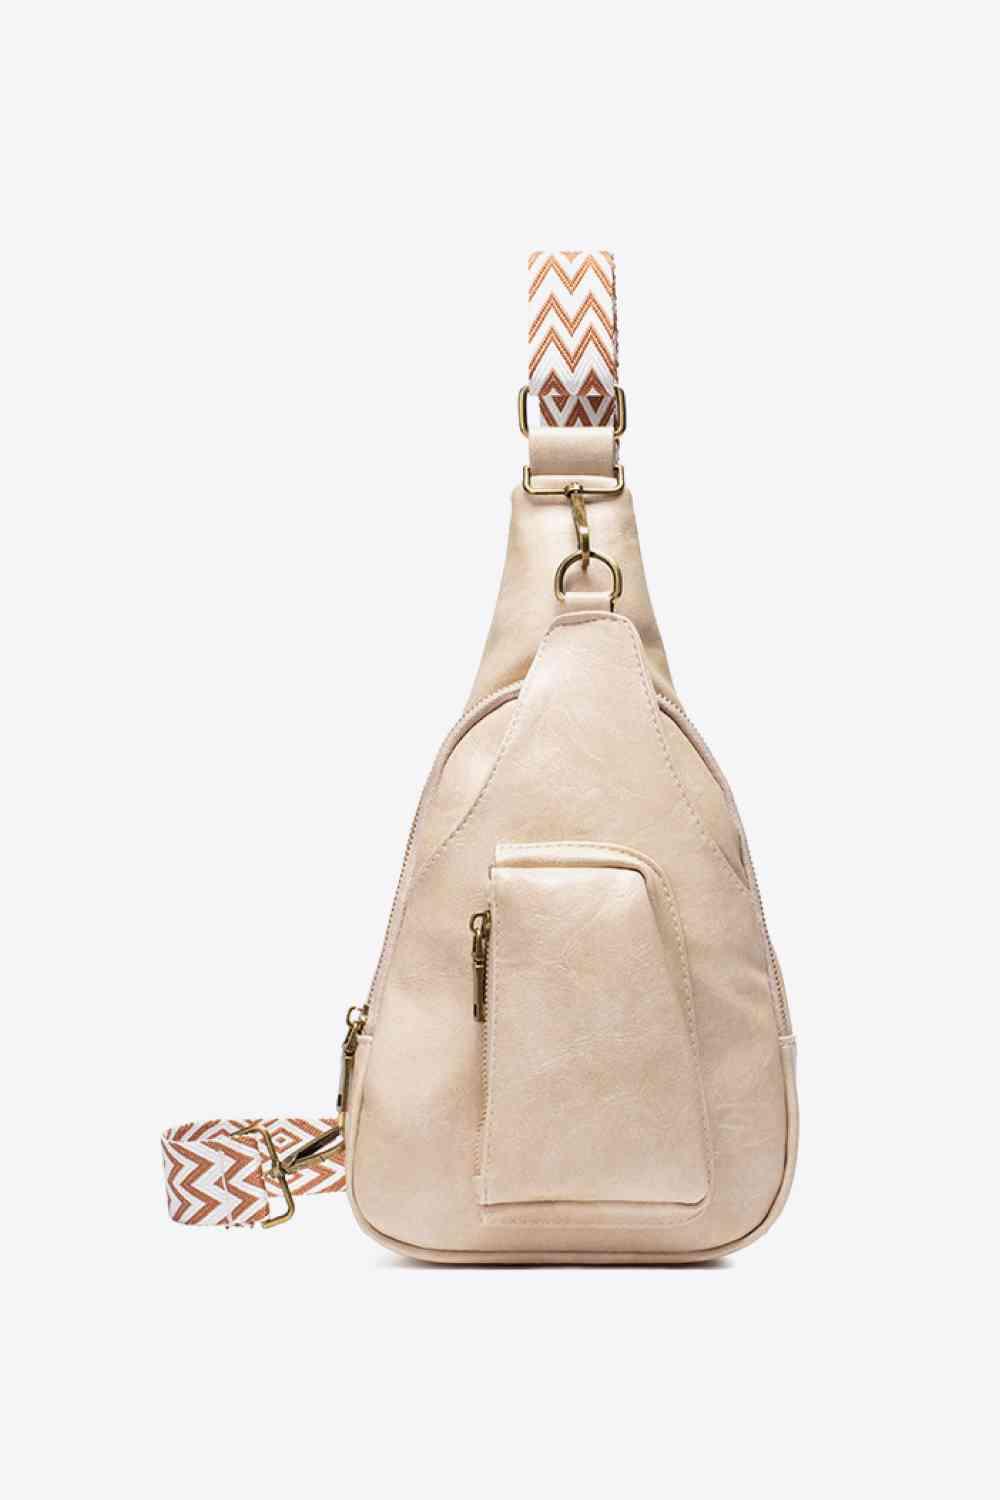 All The Feels PU Leather Sling Bag - Twin Chronicles 